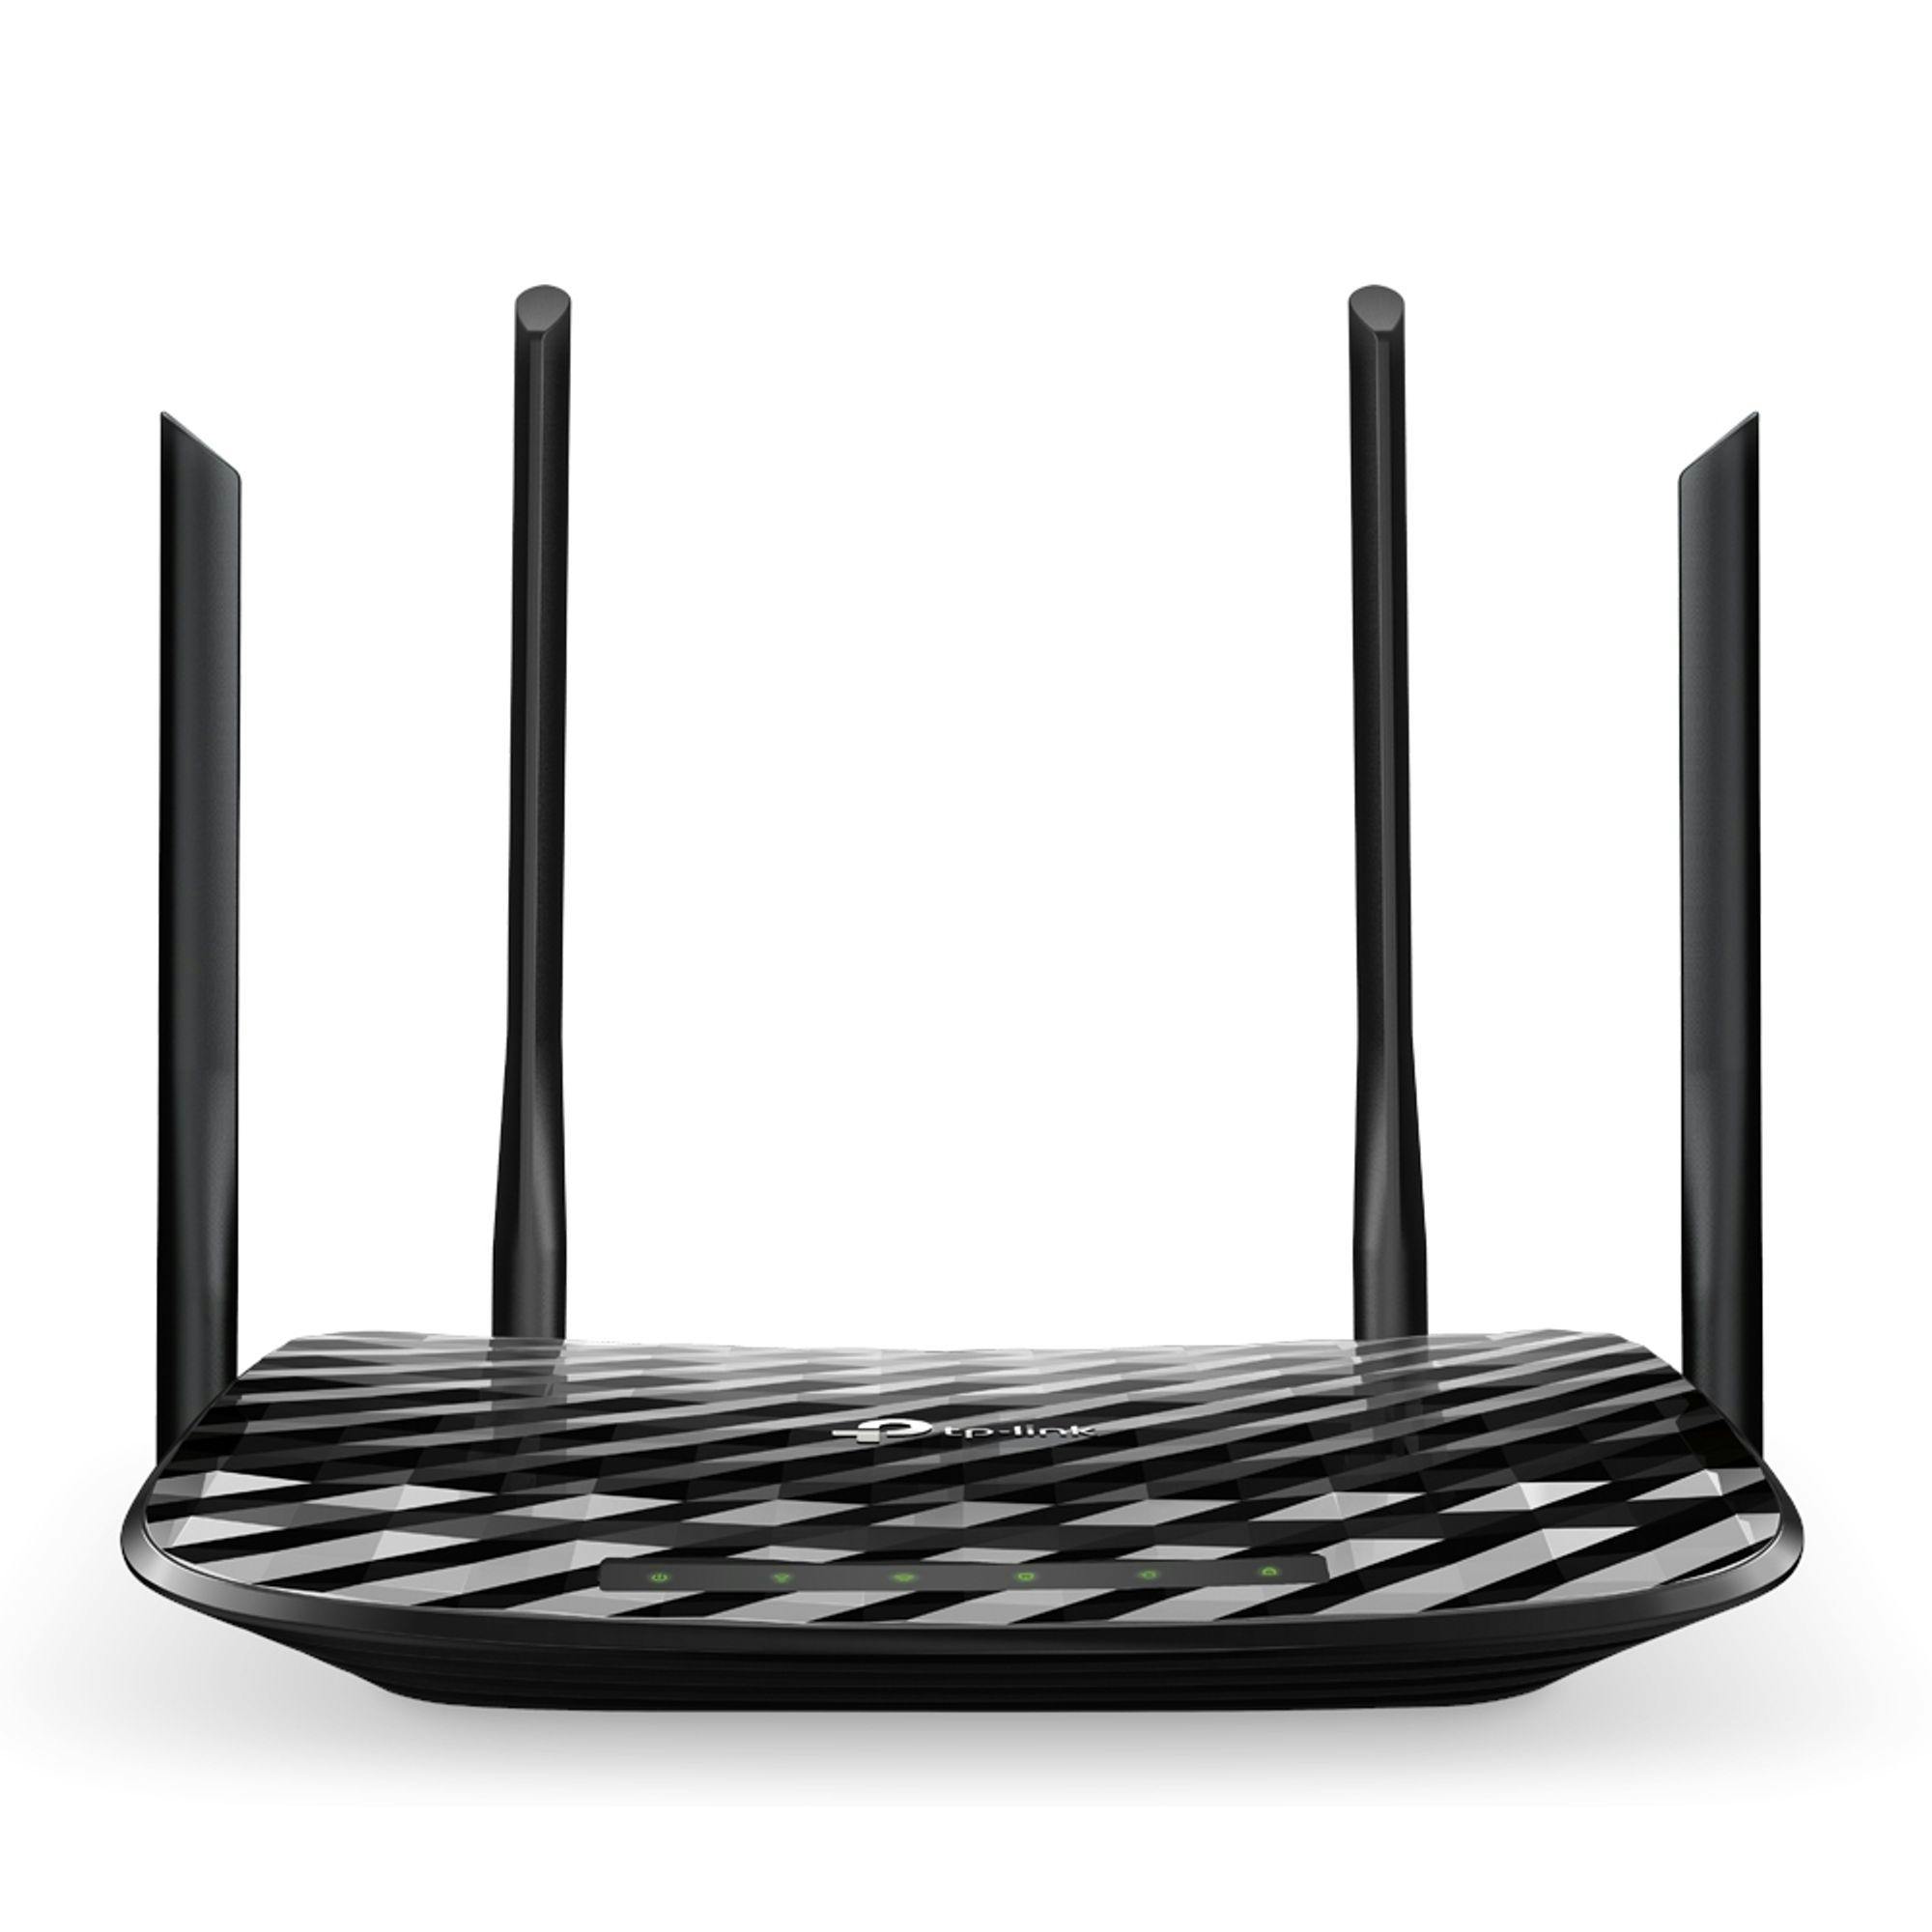 TP-LINK Routers used by malicious hackers for large traffic